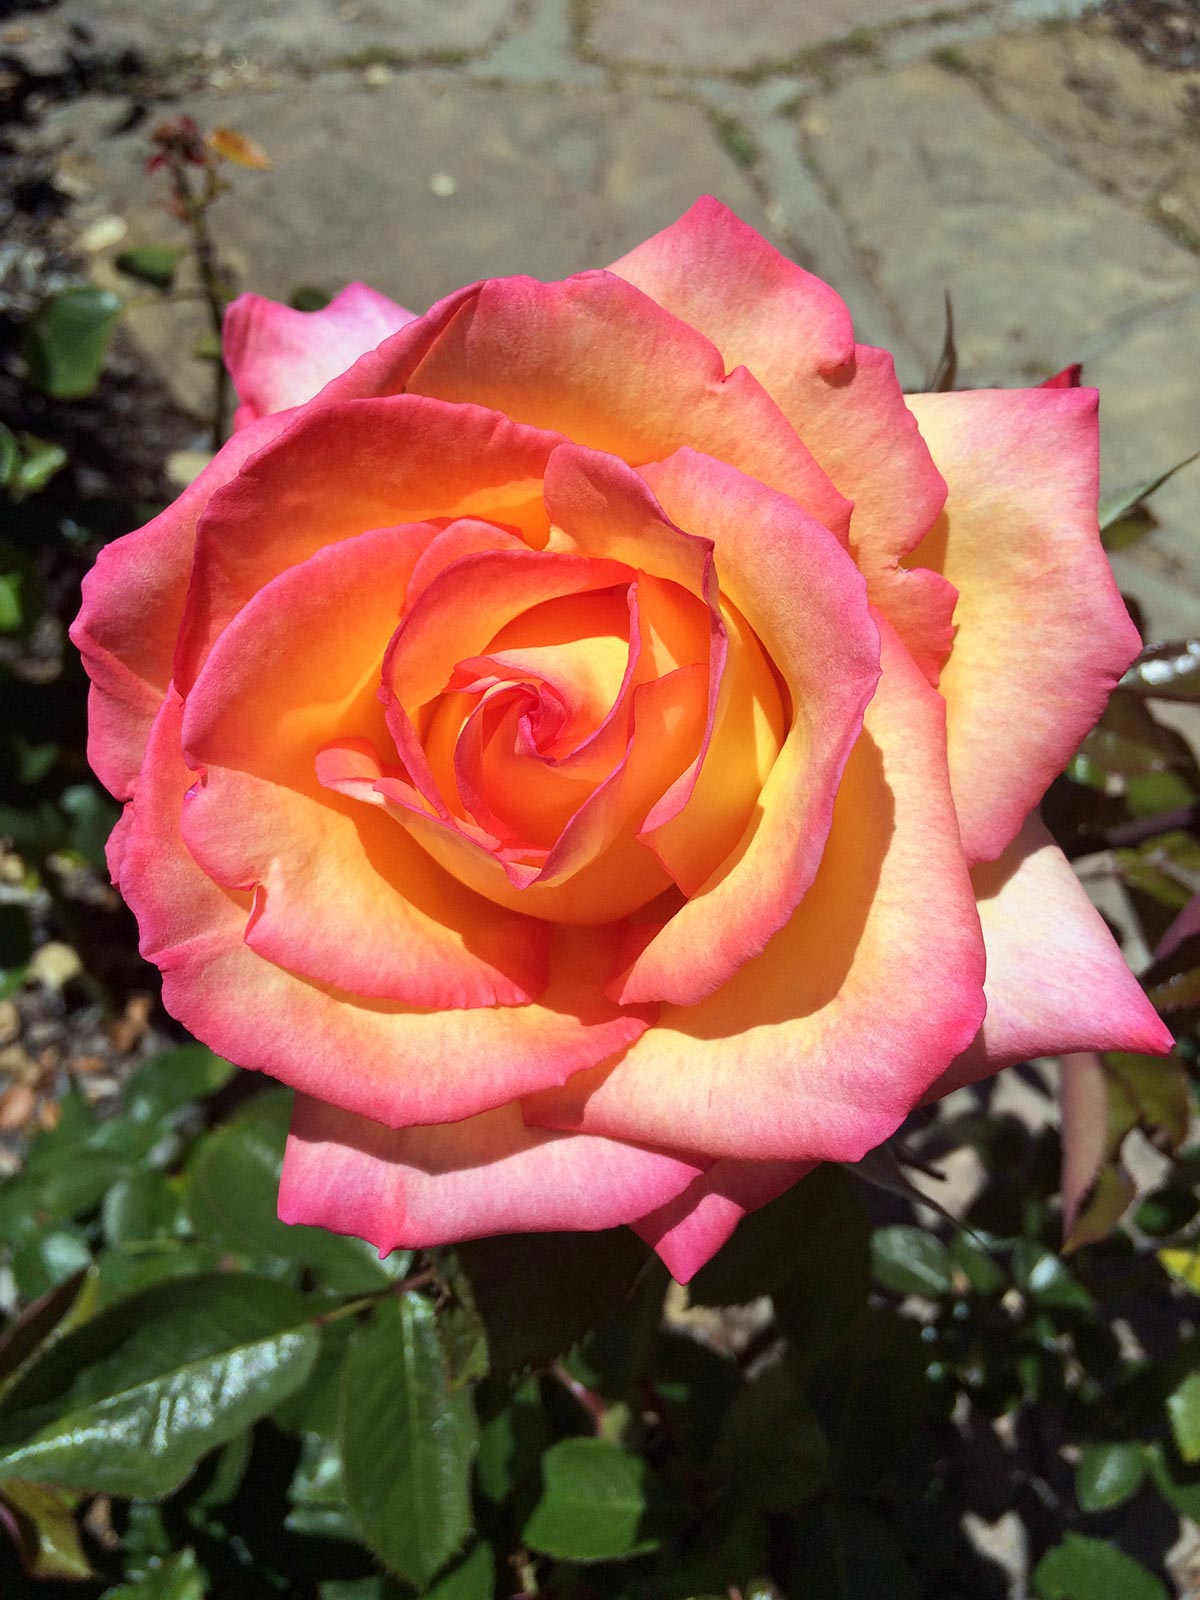 An edible pink rose with orange highlights 